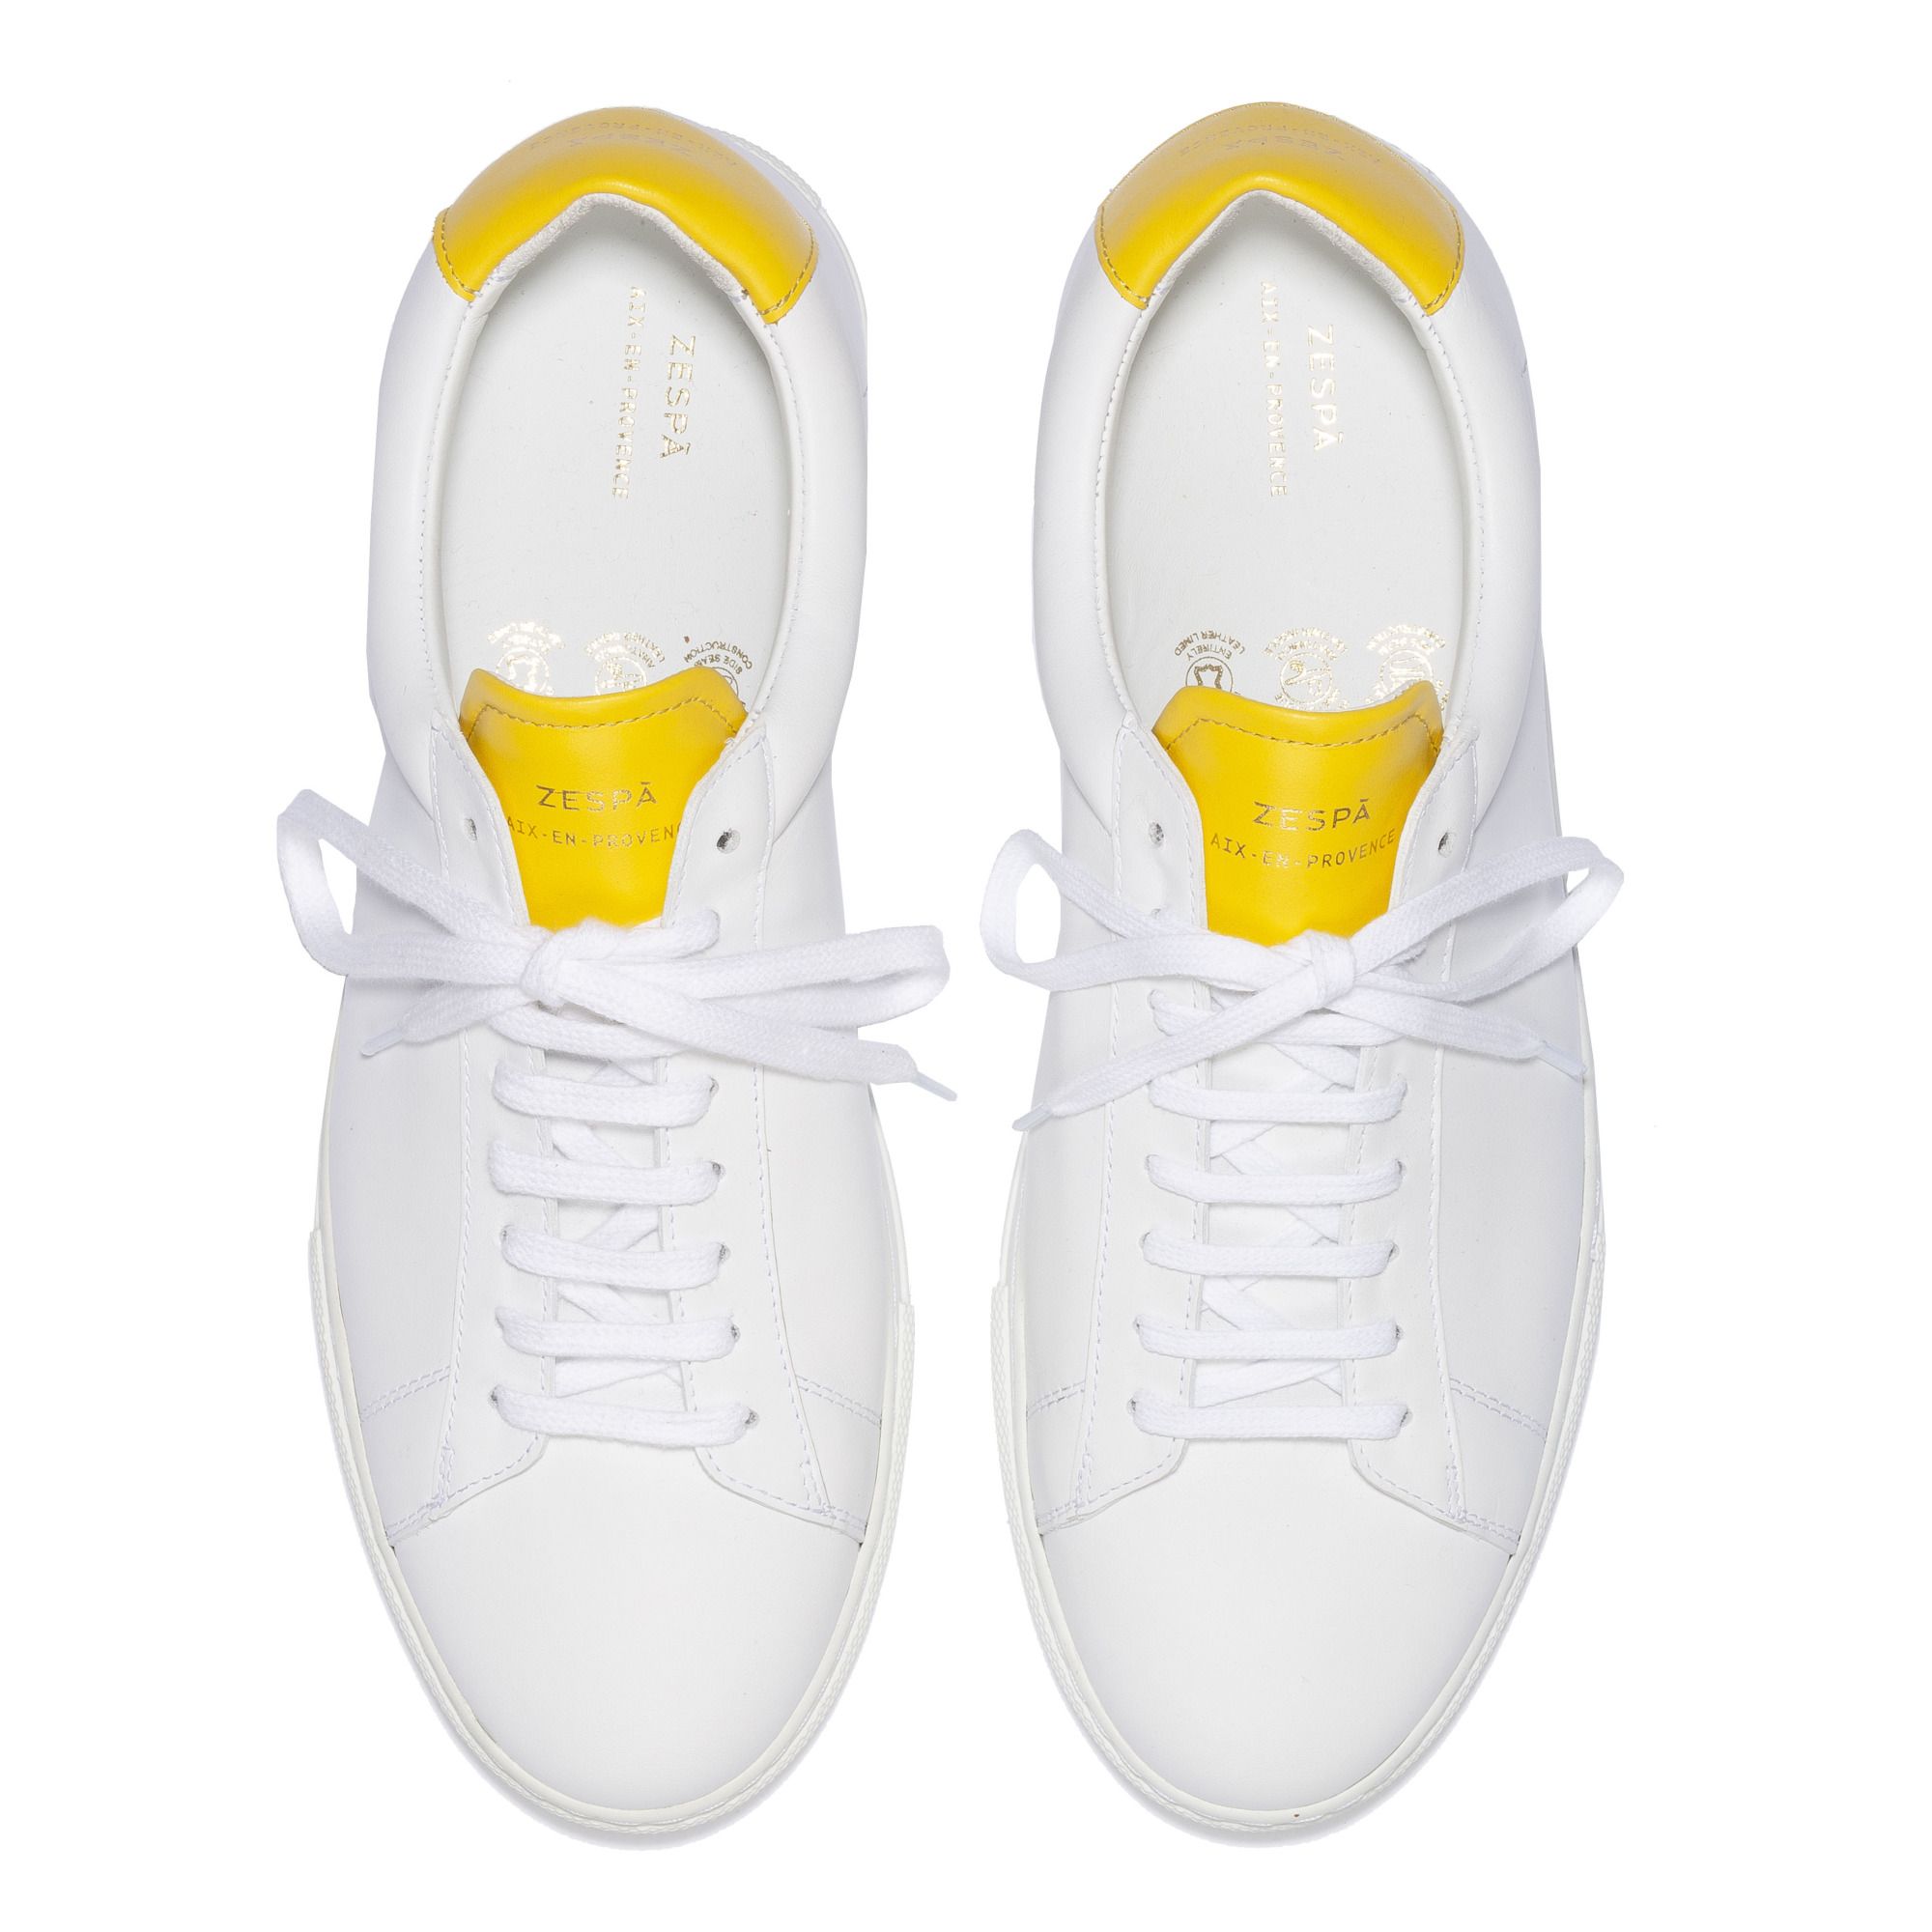 ZSP4 Nappa Leather Trainers Yellow Zespà Shoes Adult